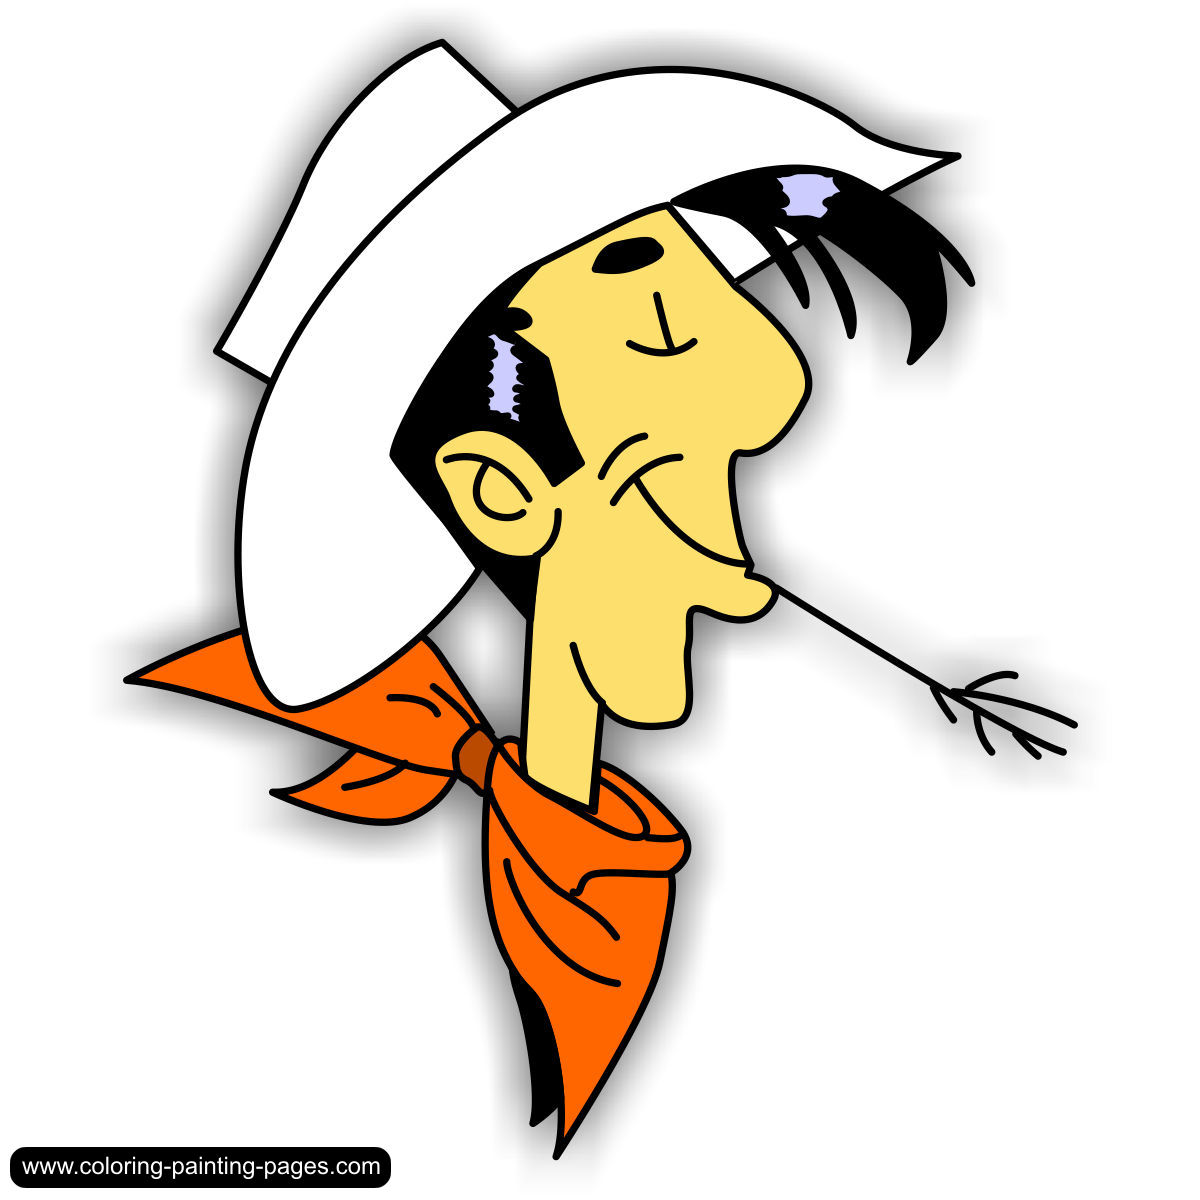 Lucky Luke Backgrounds, Compatible - PC, Mobile, Gadgets| 1200x1200 px